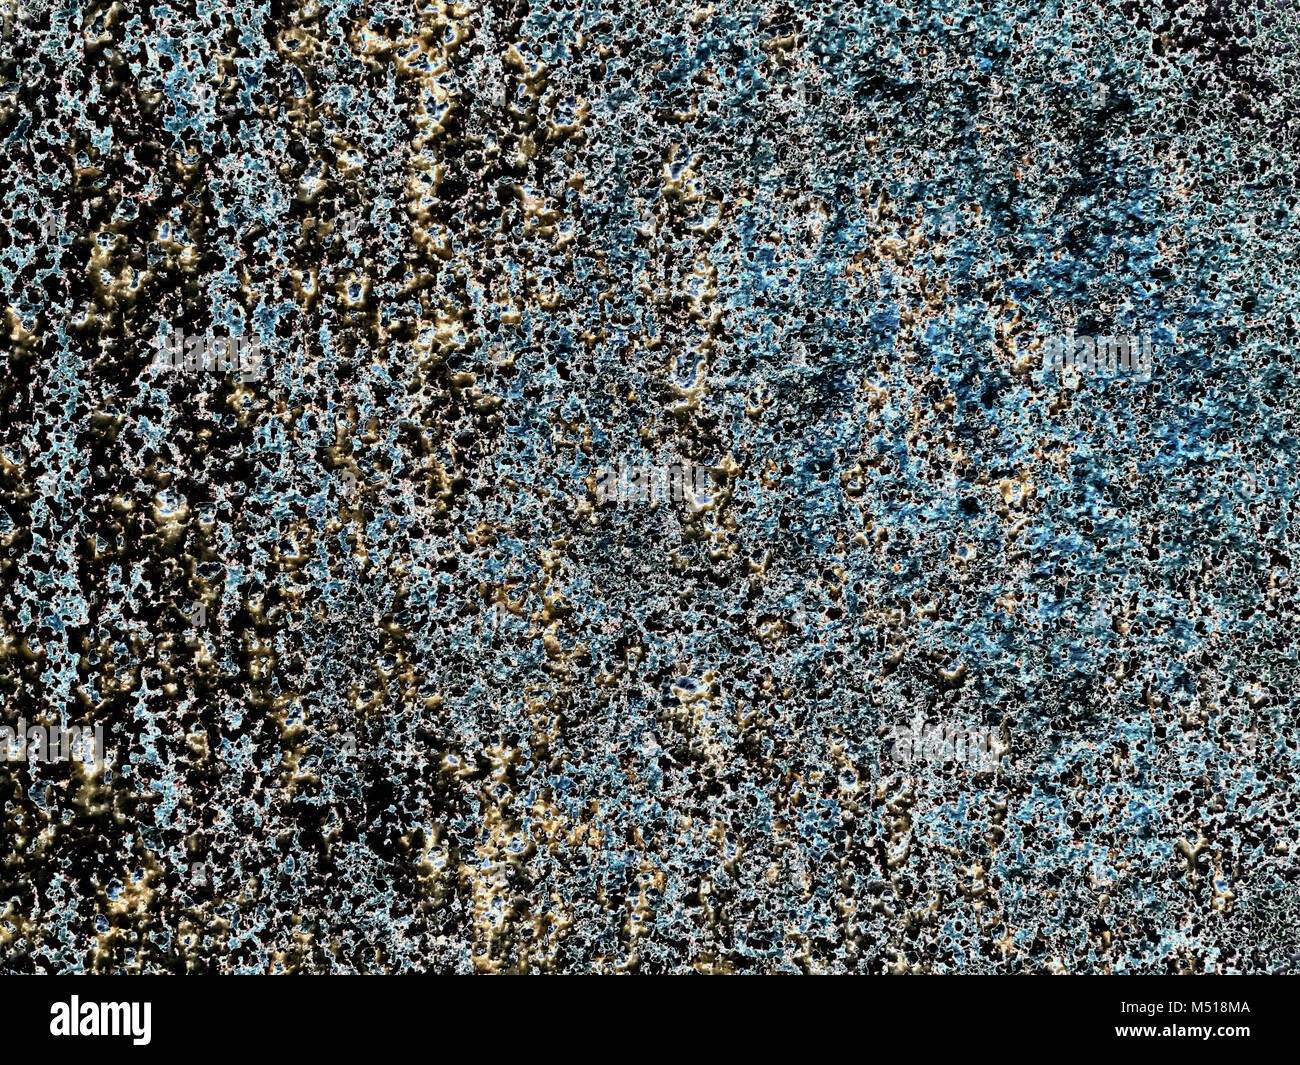 Background with blue and black paint flaking off a wall Stock Photo